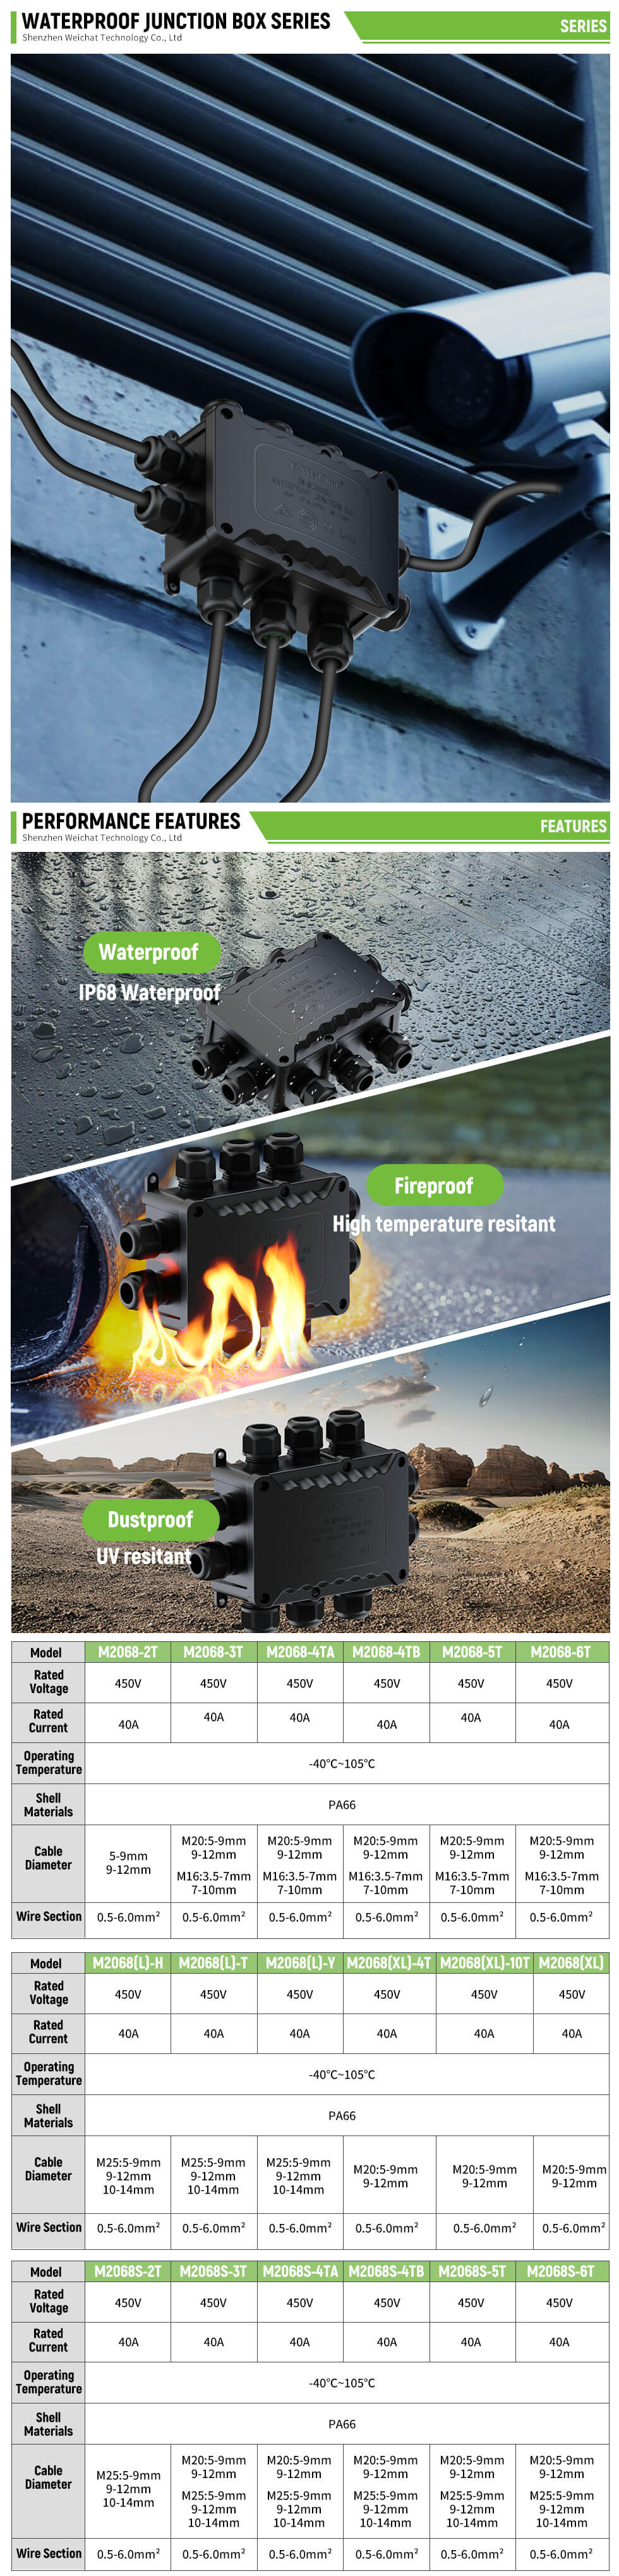 Waterproof Junction Box product series introduction